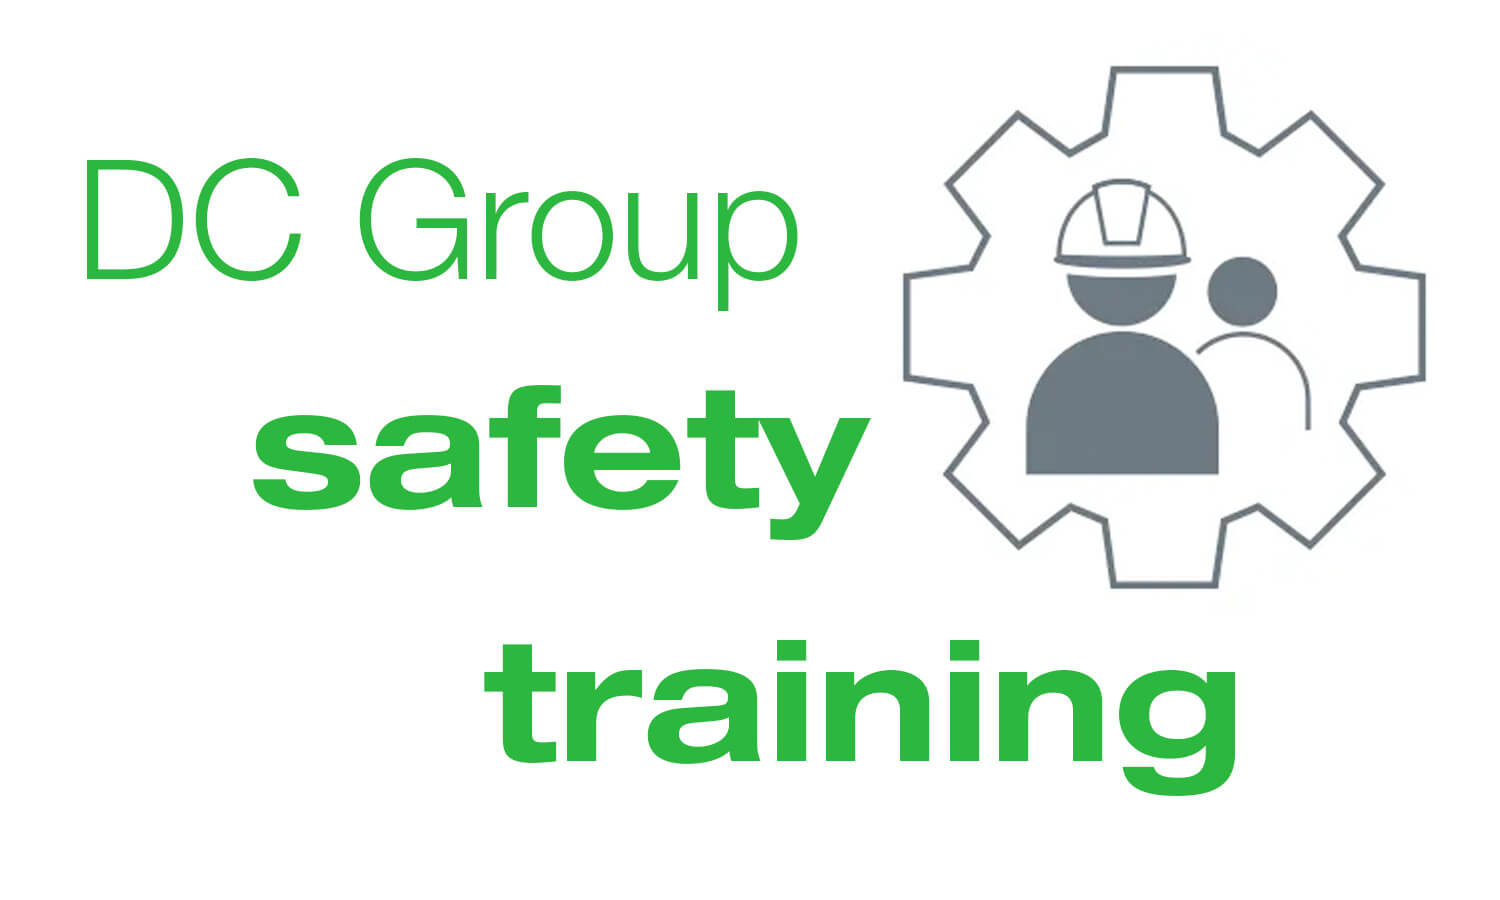 dc group safety training